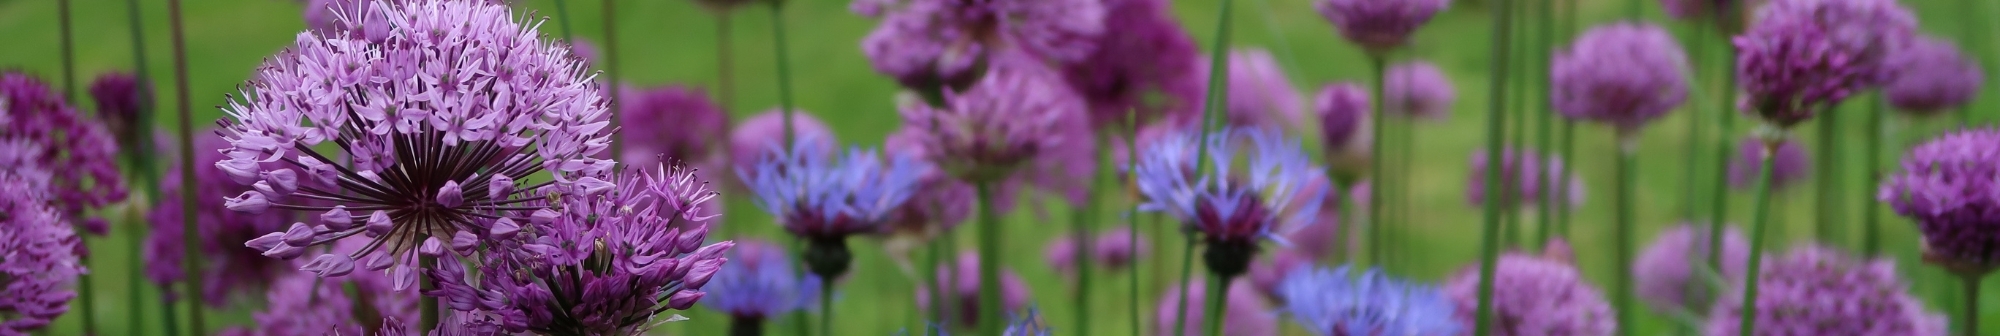 close-up-of-purple-flowers-in-hospice-garden